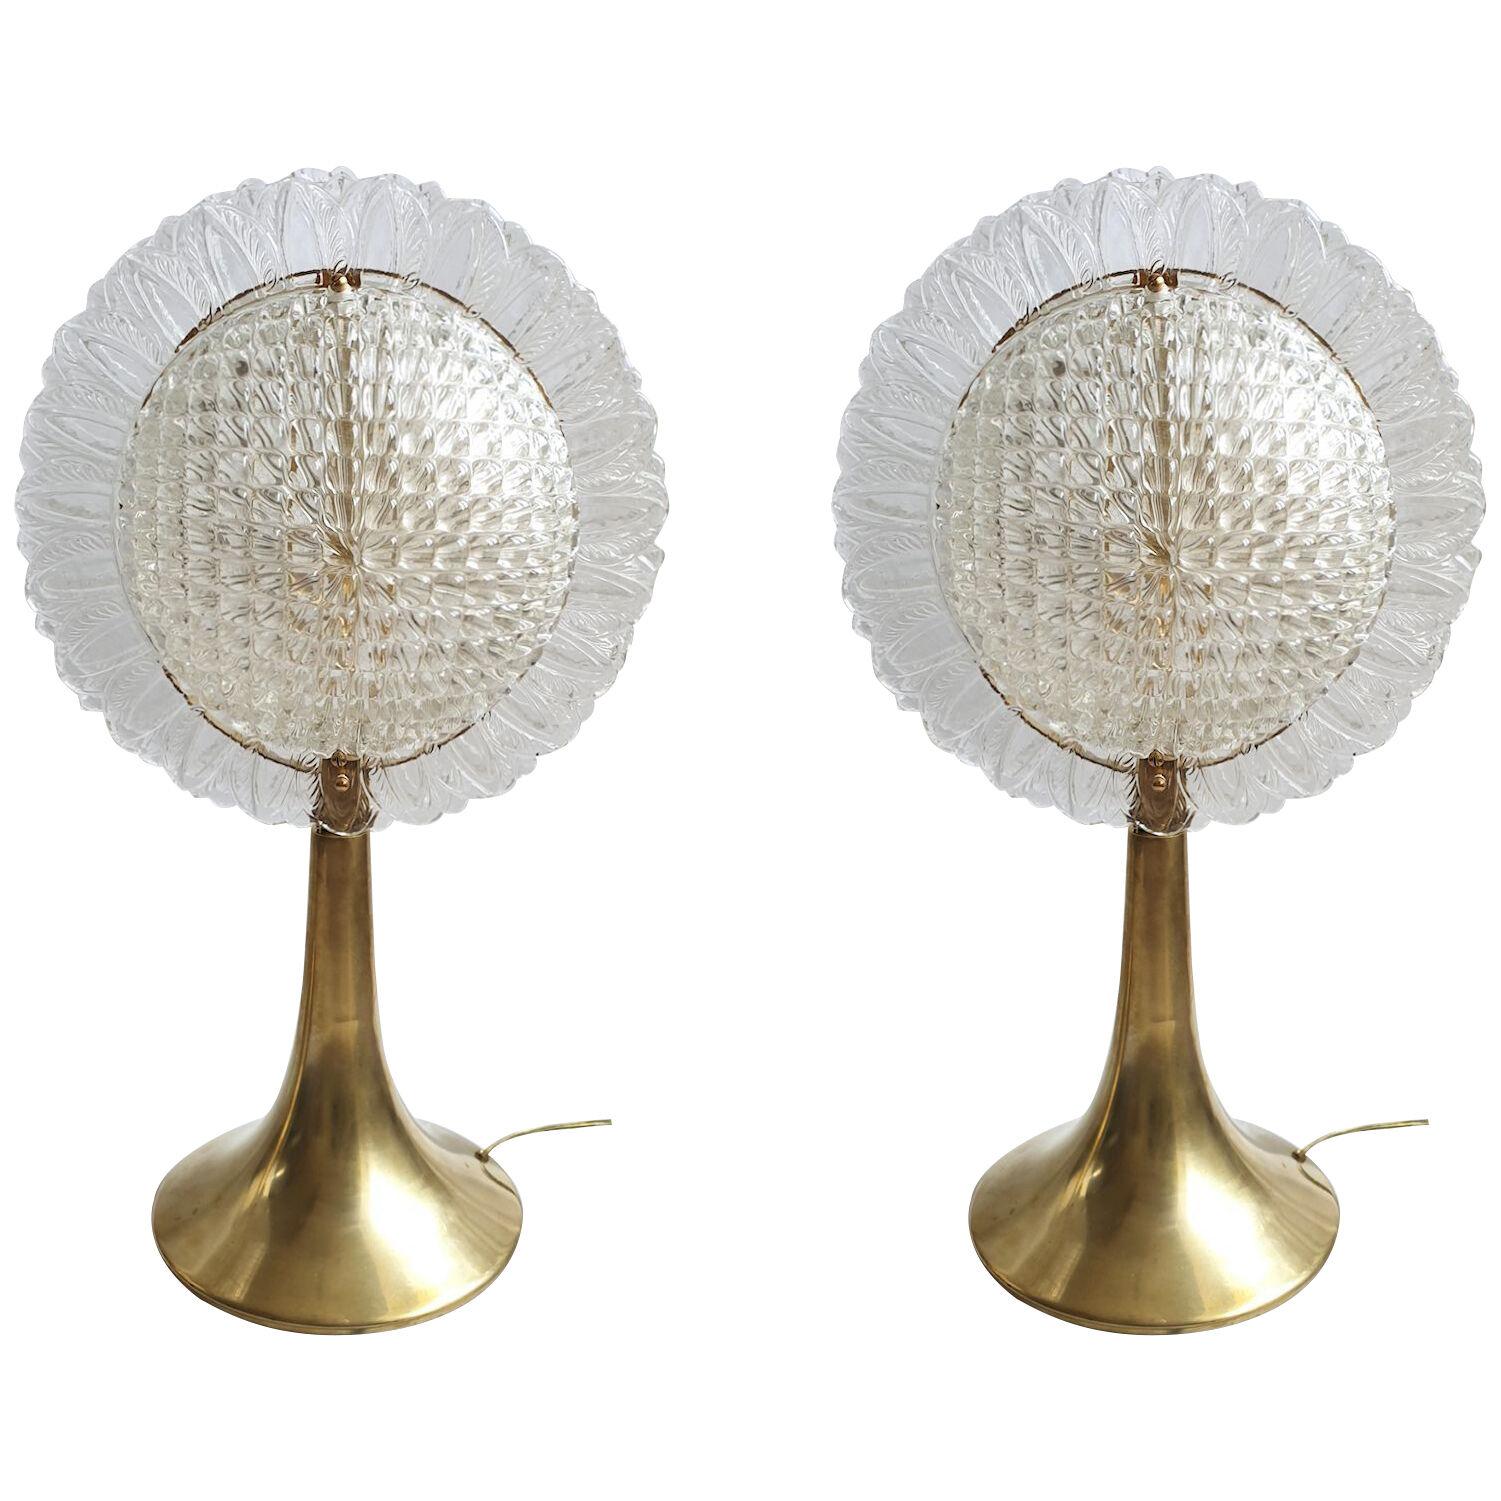 Pair of large Murano glass and brass table lamps